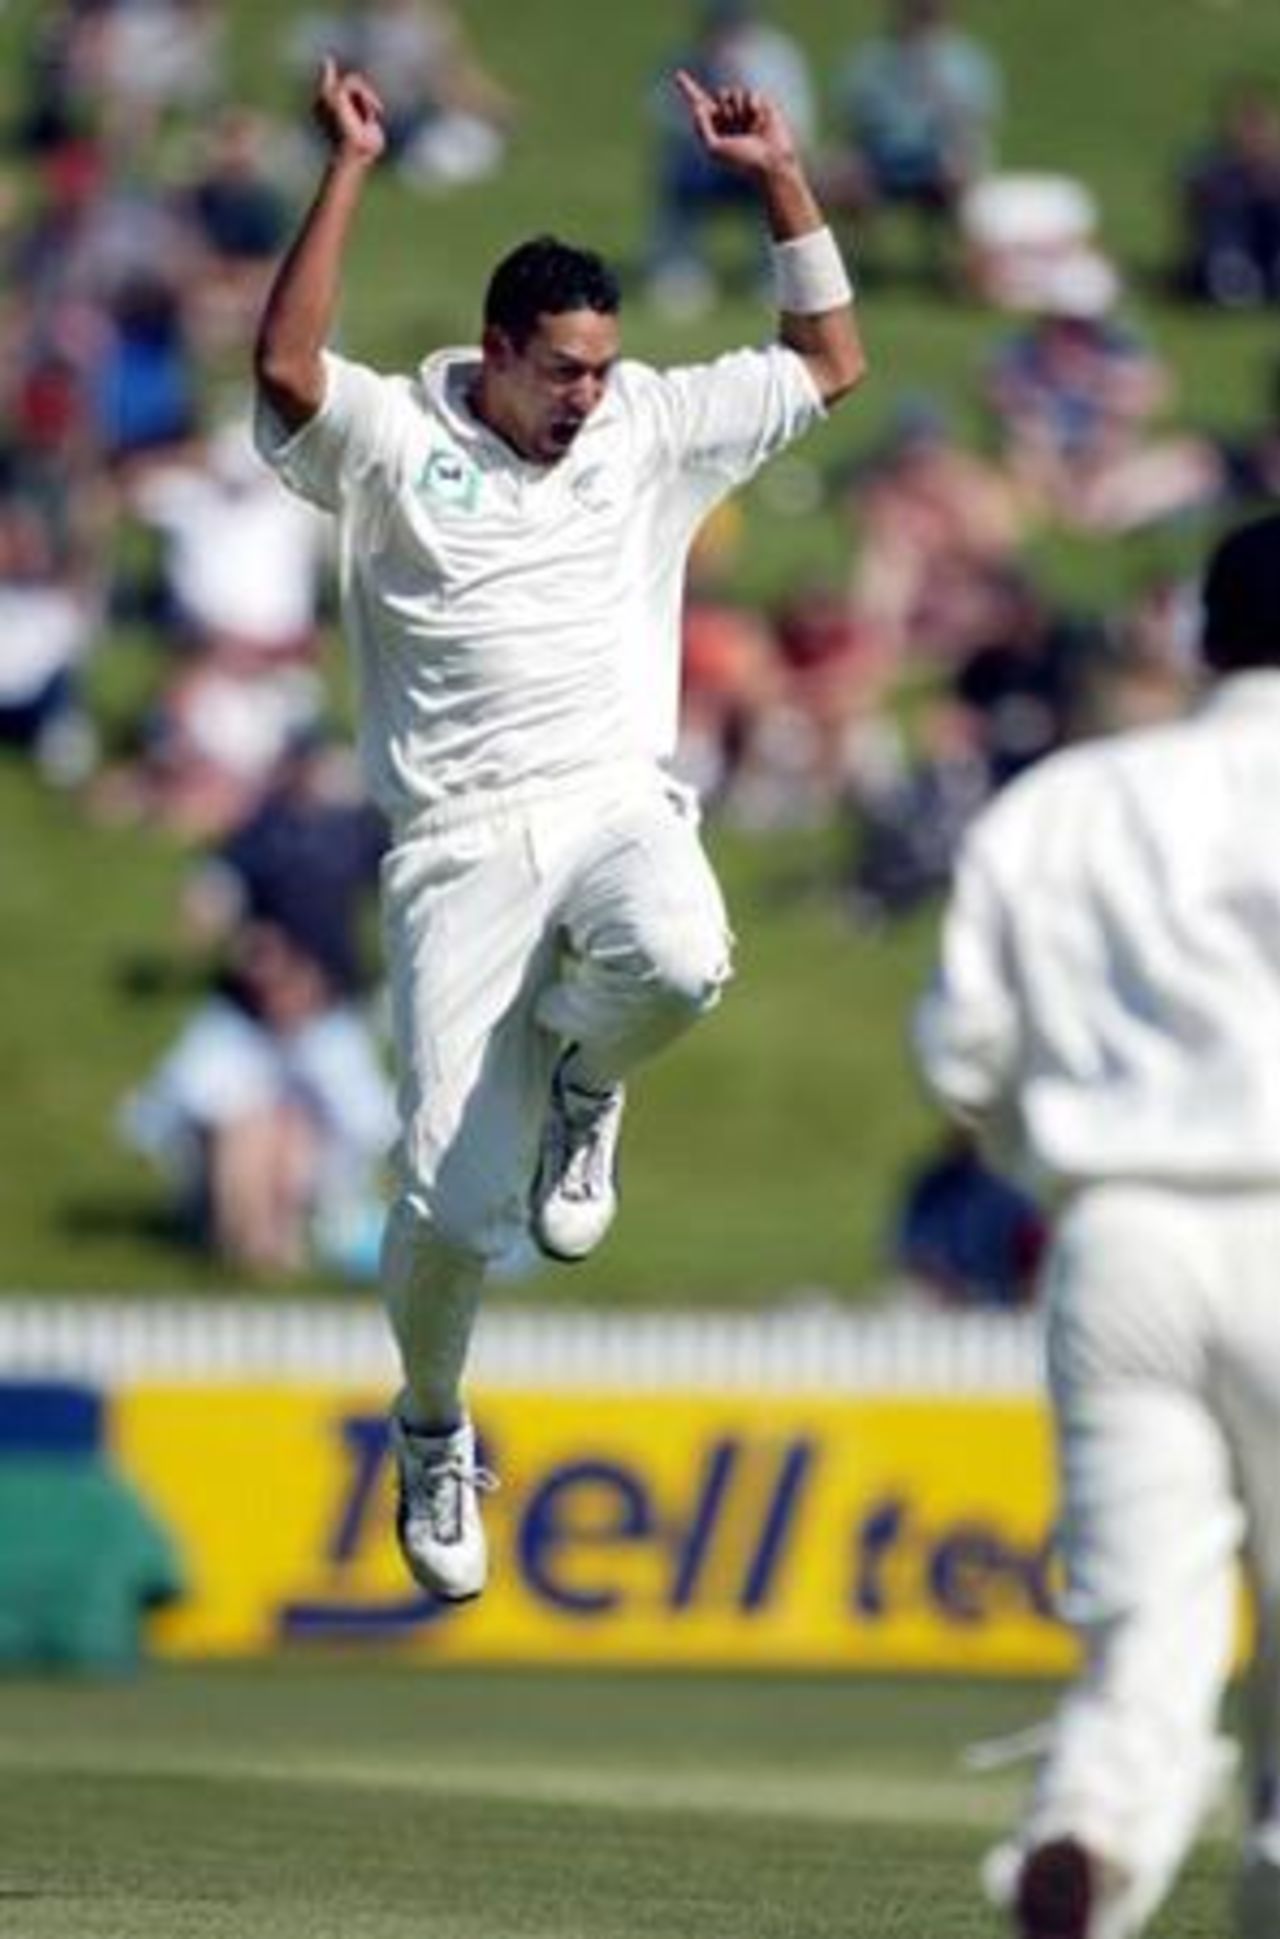 New Zealand bowler Daryl Tuffey celebrates the dismissal of Indian batsman Sanjay Bangar, caught at gully by Jacob Oram off the bowling of Tuffey for one in his first innings. 2nd Test: New Zealand v India at Westpac Park, Hamilton, 19-23 December 2002 (20 December 2002).